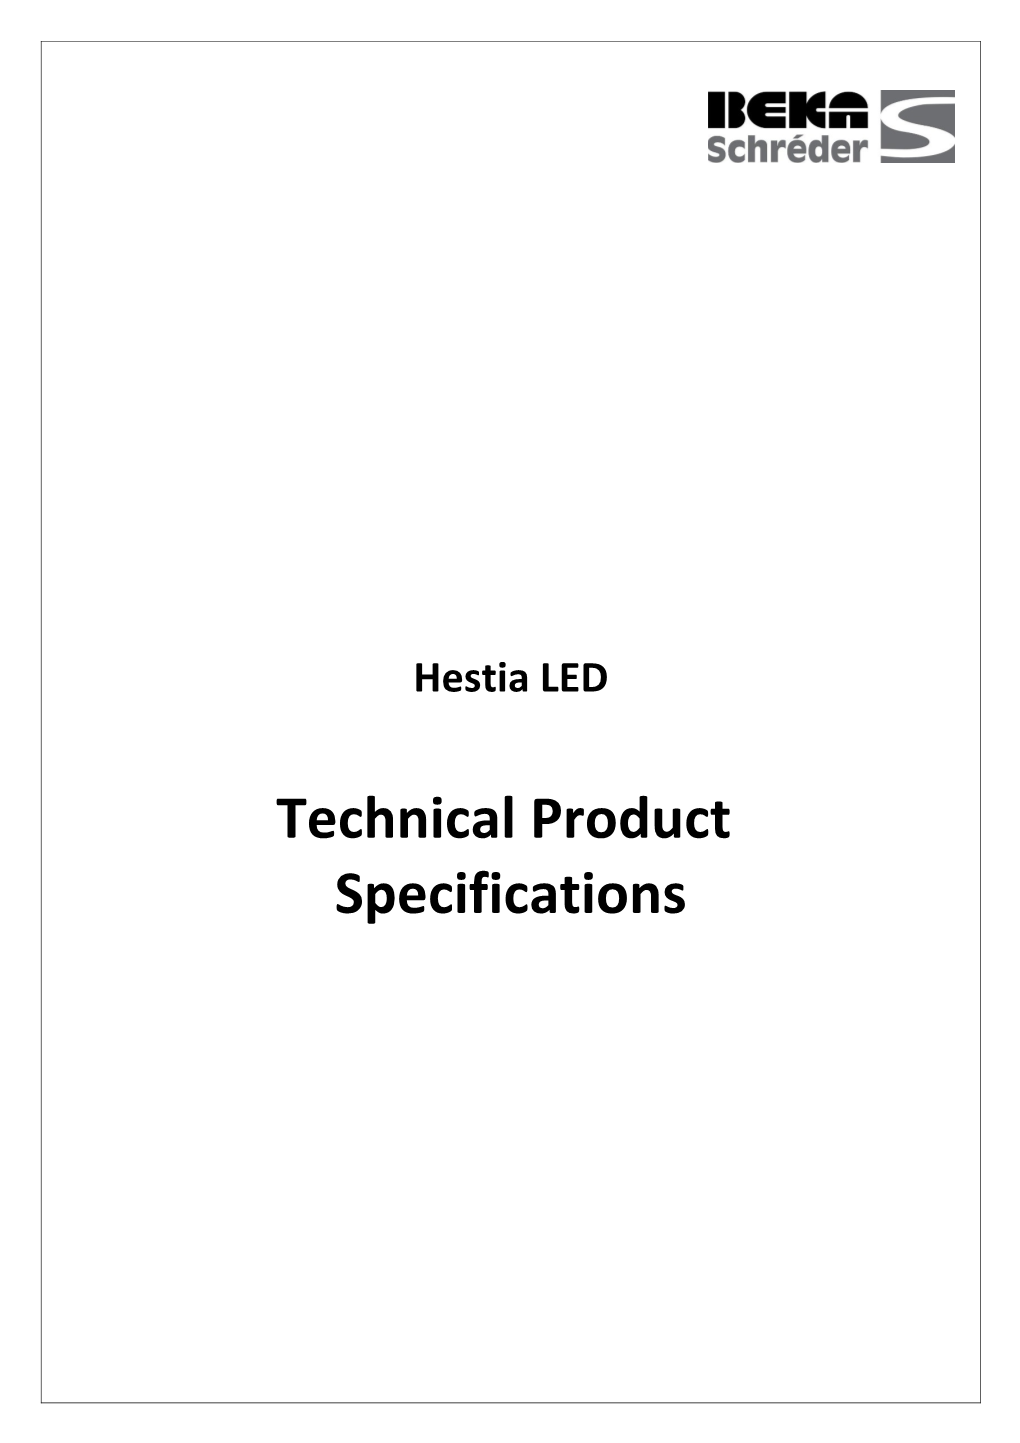 Technical Product Specifications - Template